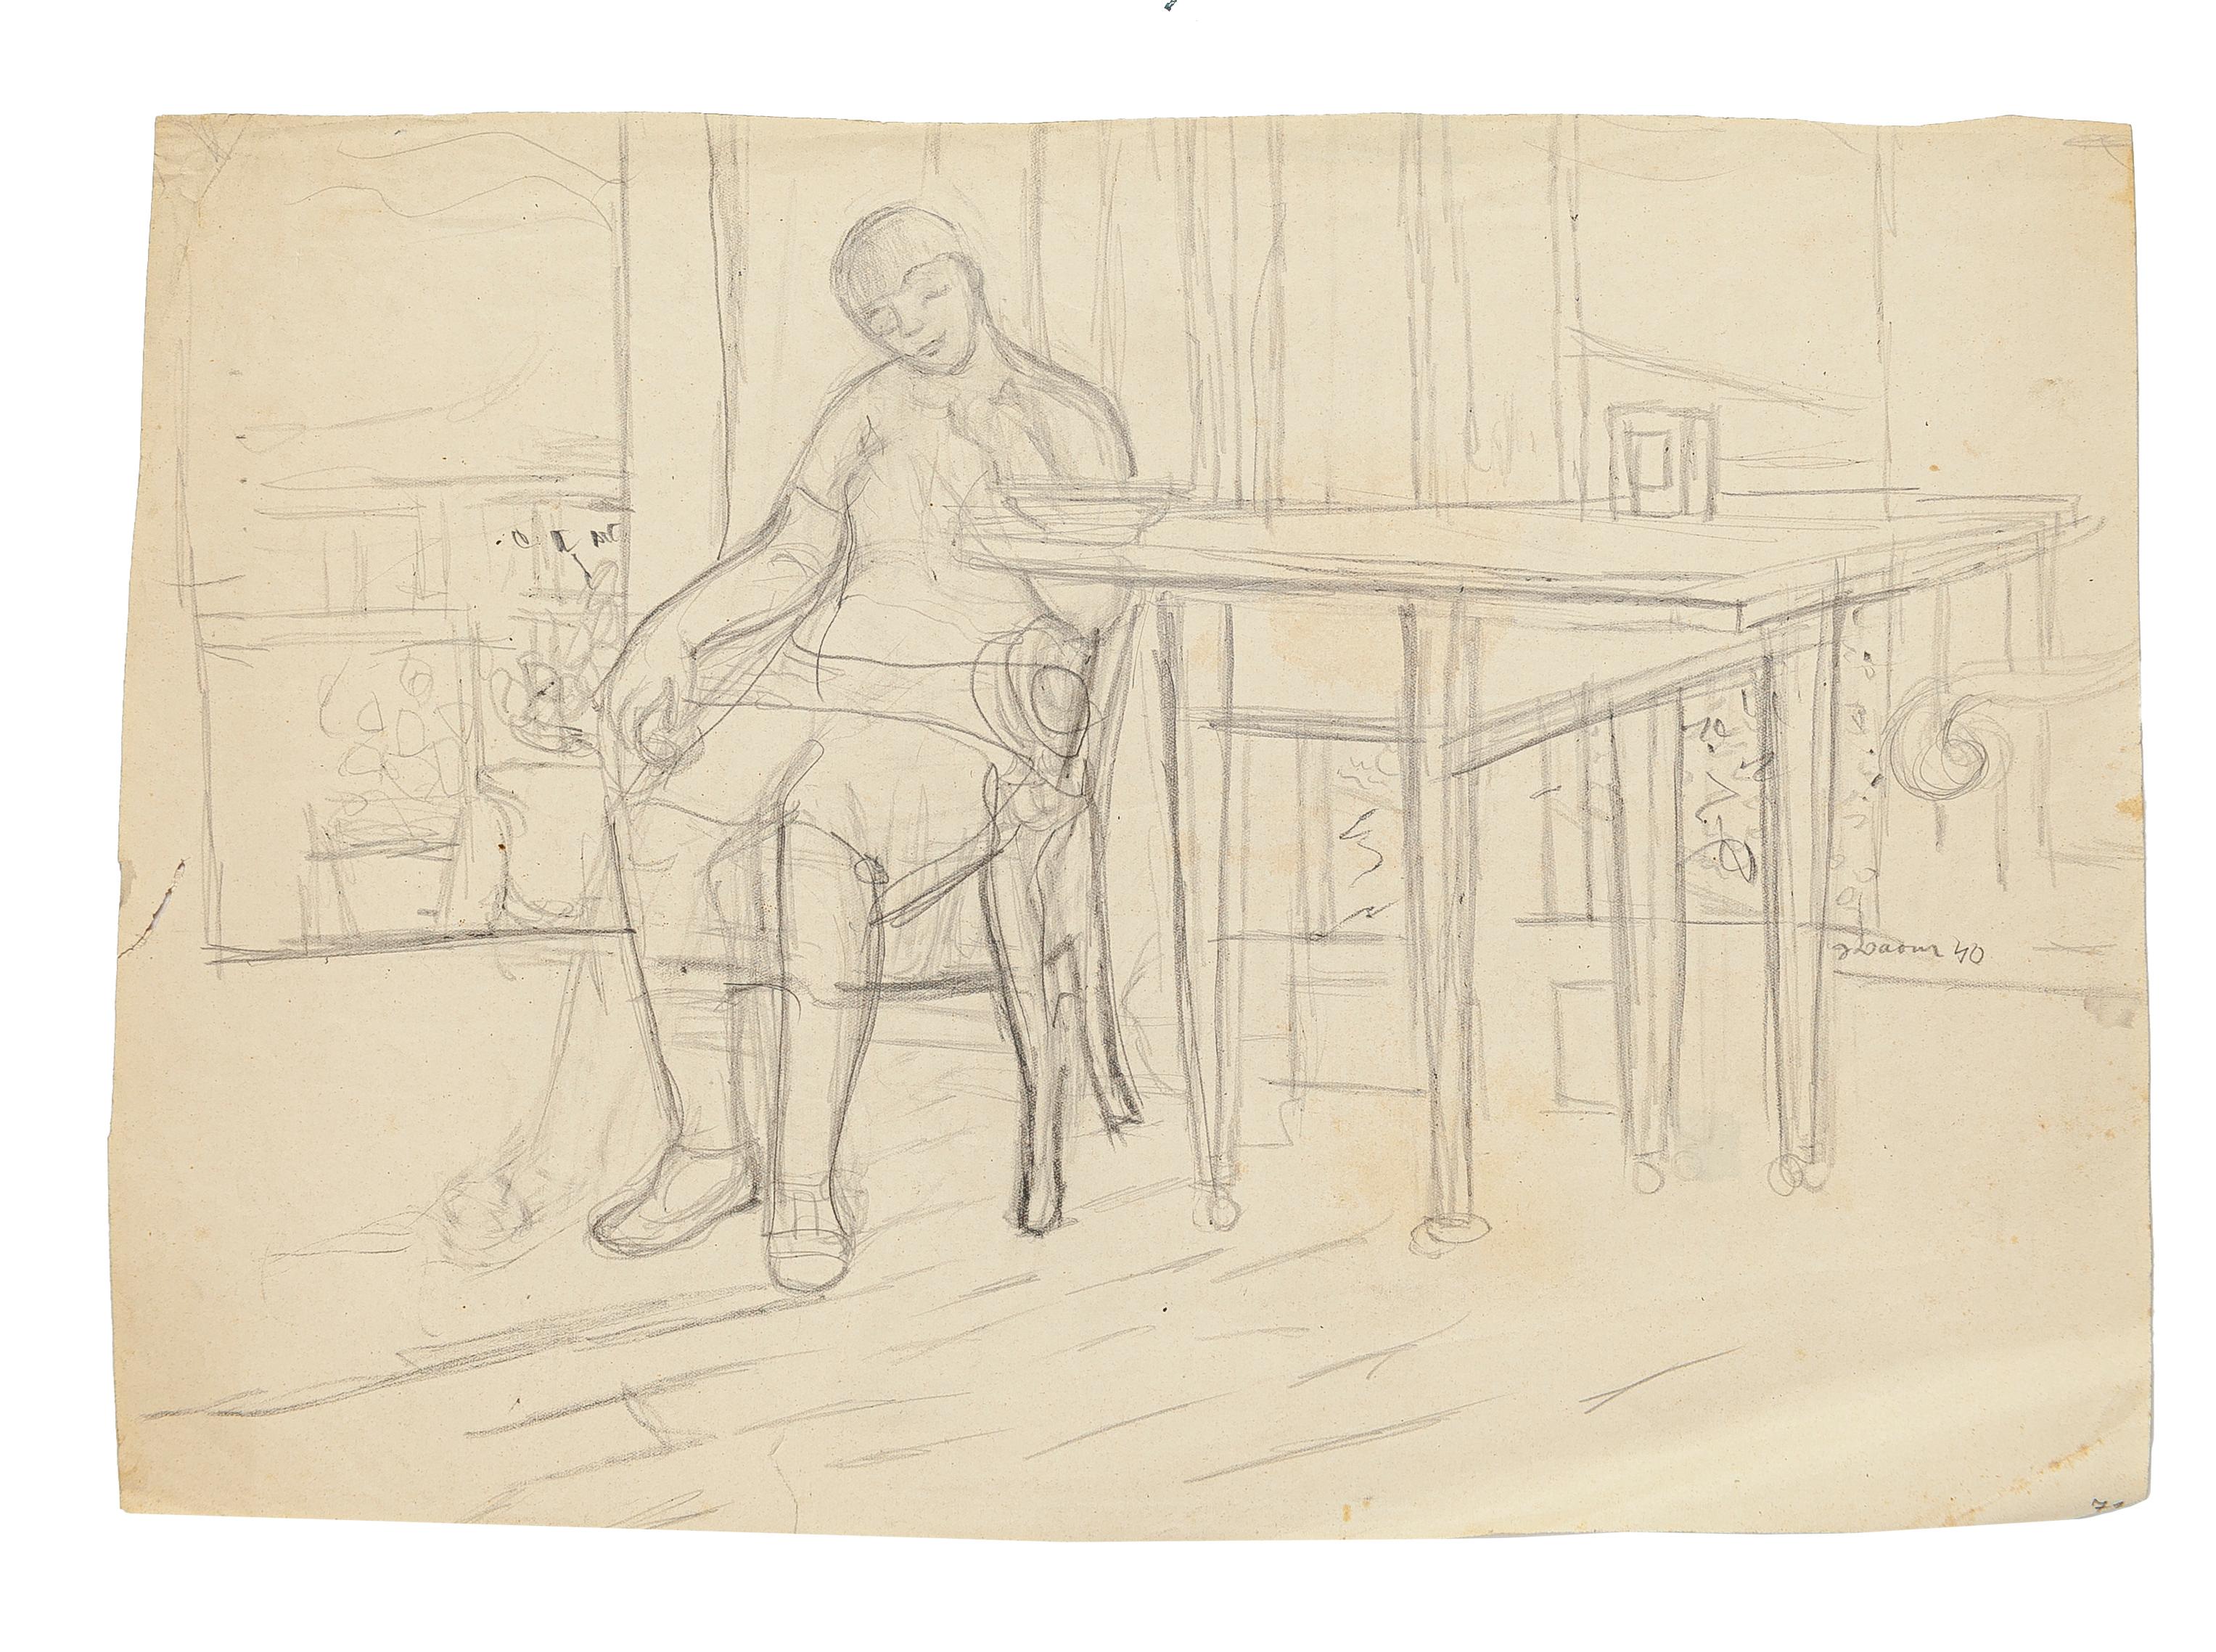 Figure in Interior is an original drawing in pencil on paper realized by Jeanne Daour in 1940, Hand-signed and dated on the left inside of drawing.

The state of preservation is good and aged with some small stain on the margins.

Sheet dimension:30